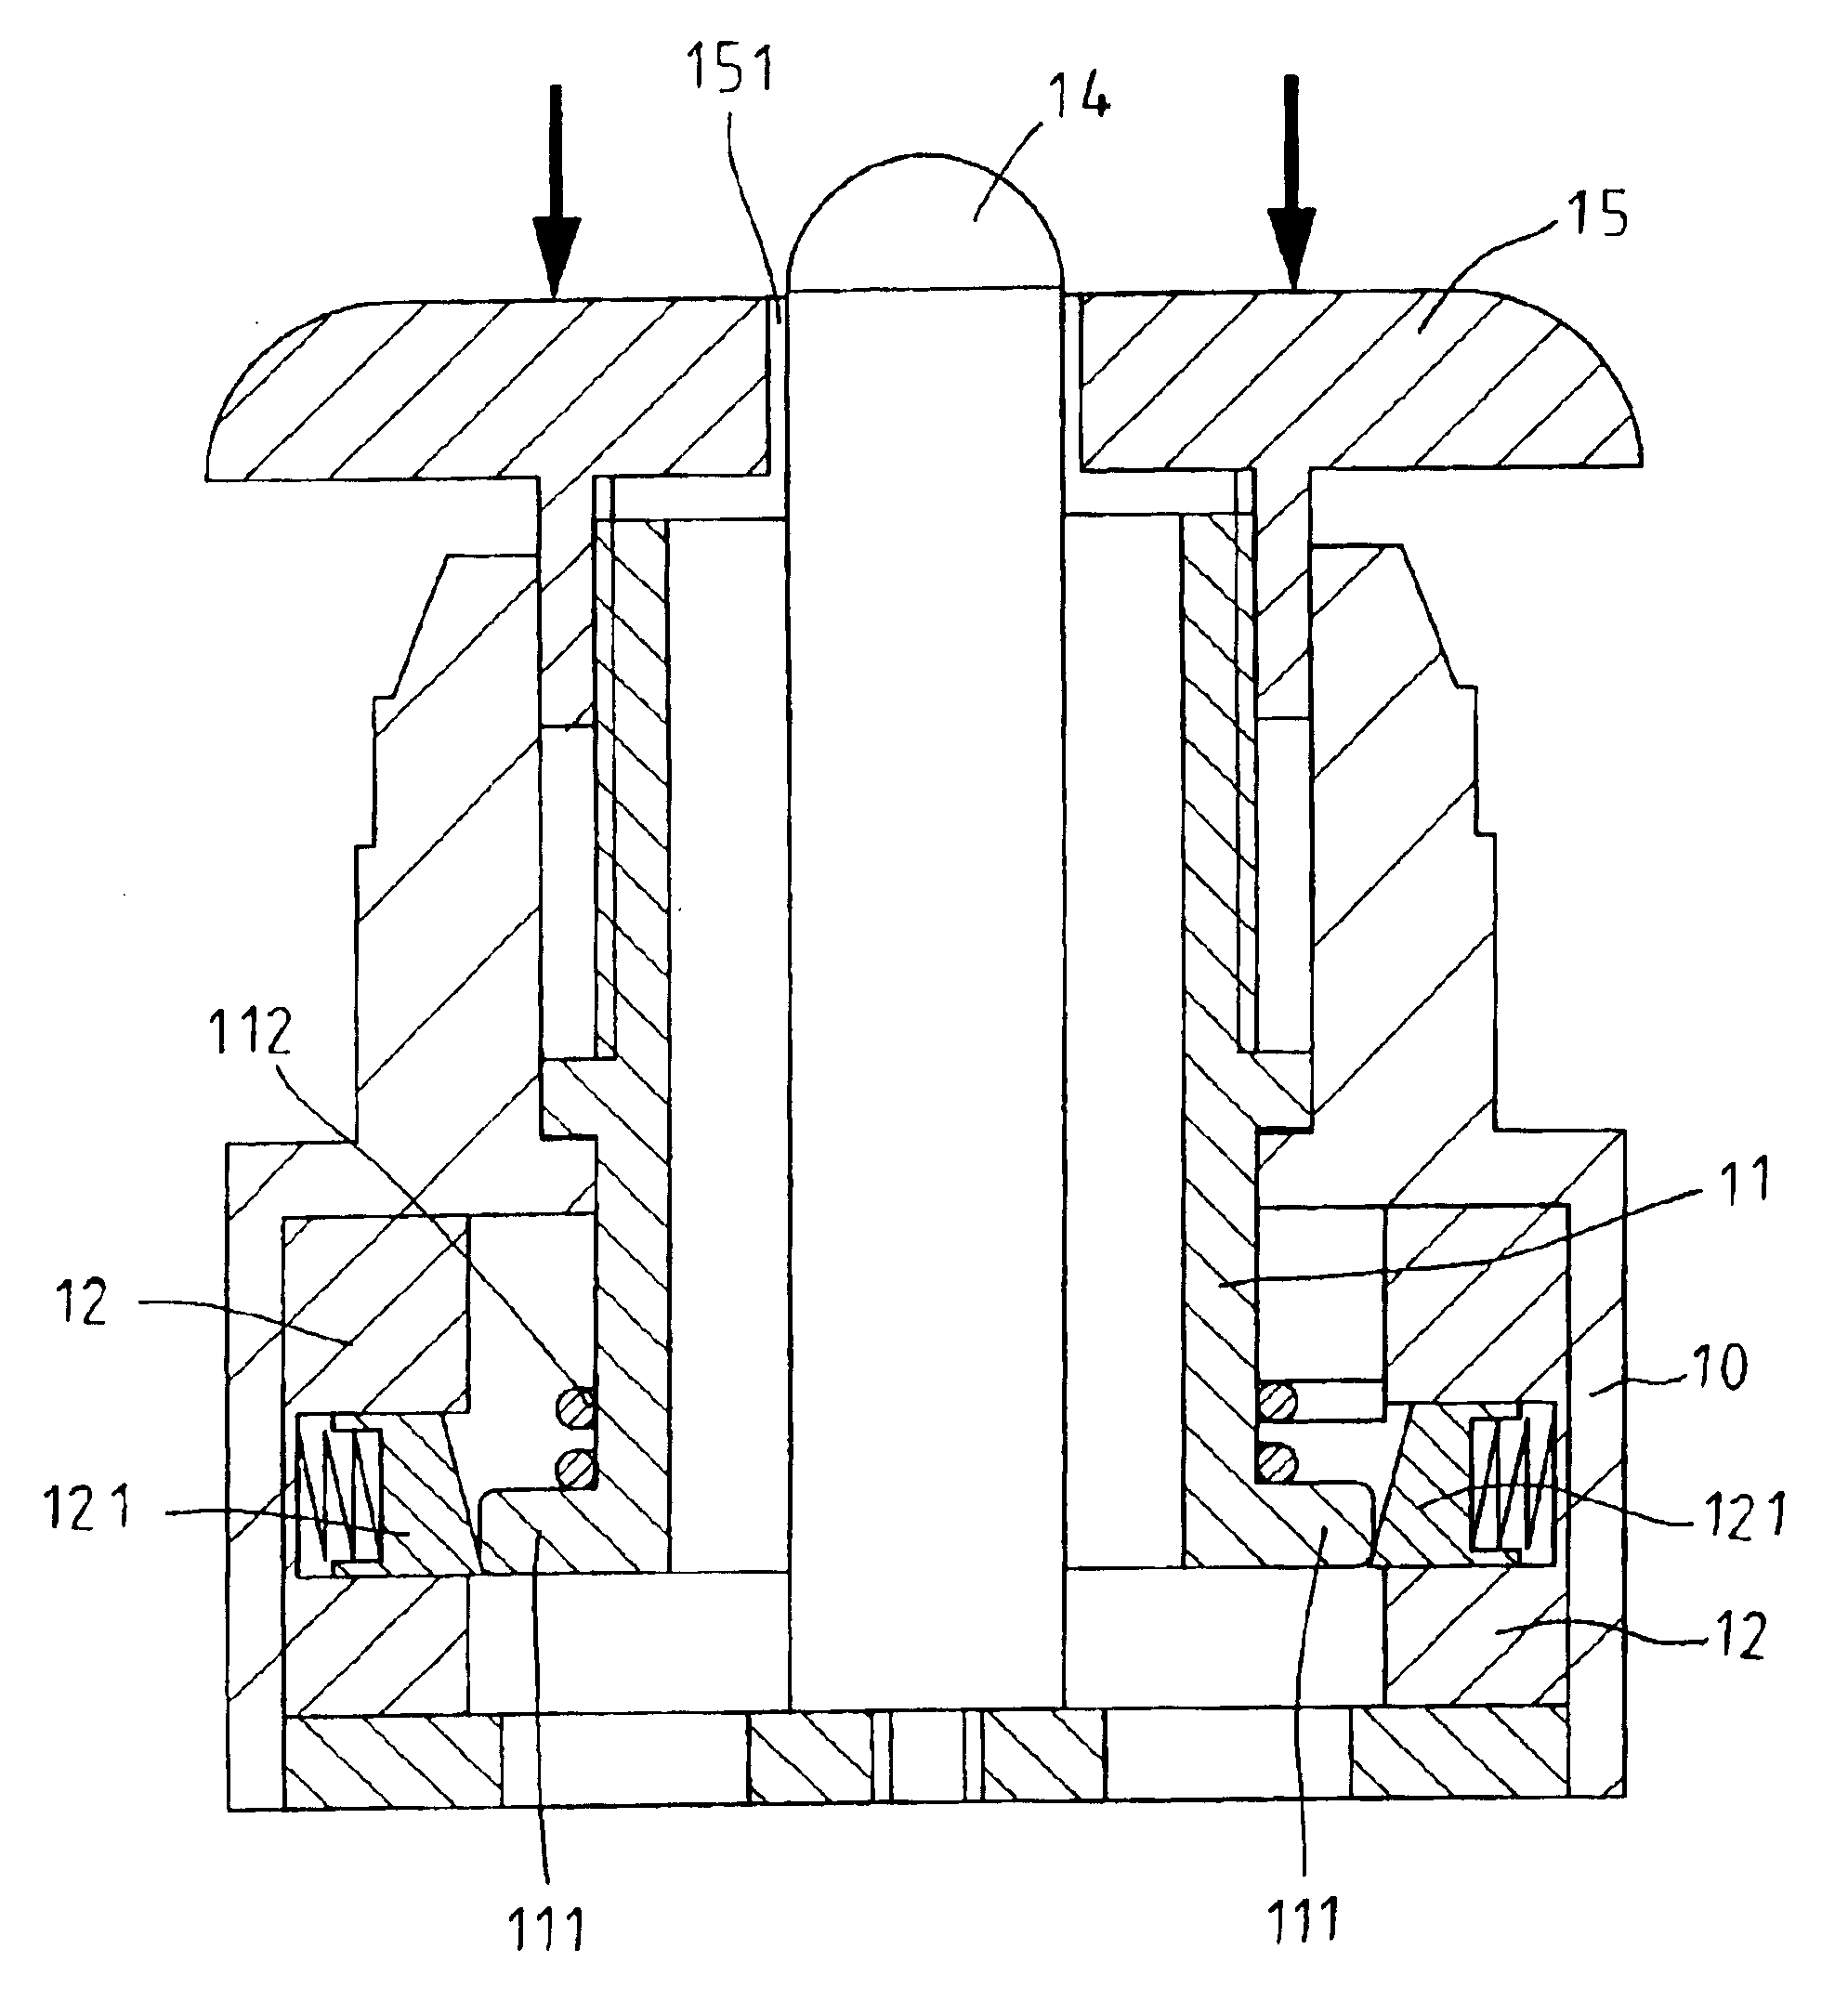 Emergency switch provided with means to signify state of activation or inactivation thereof